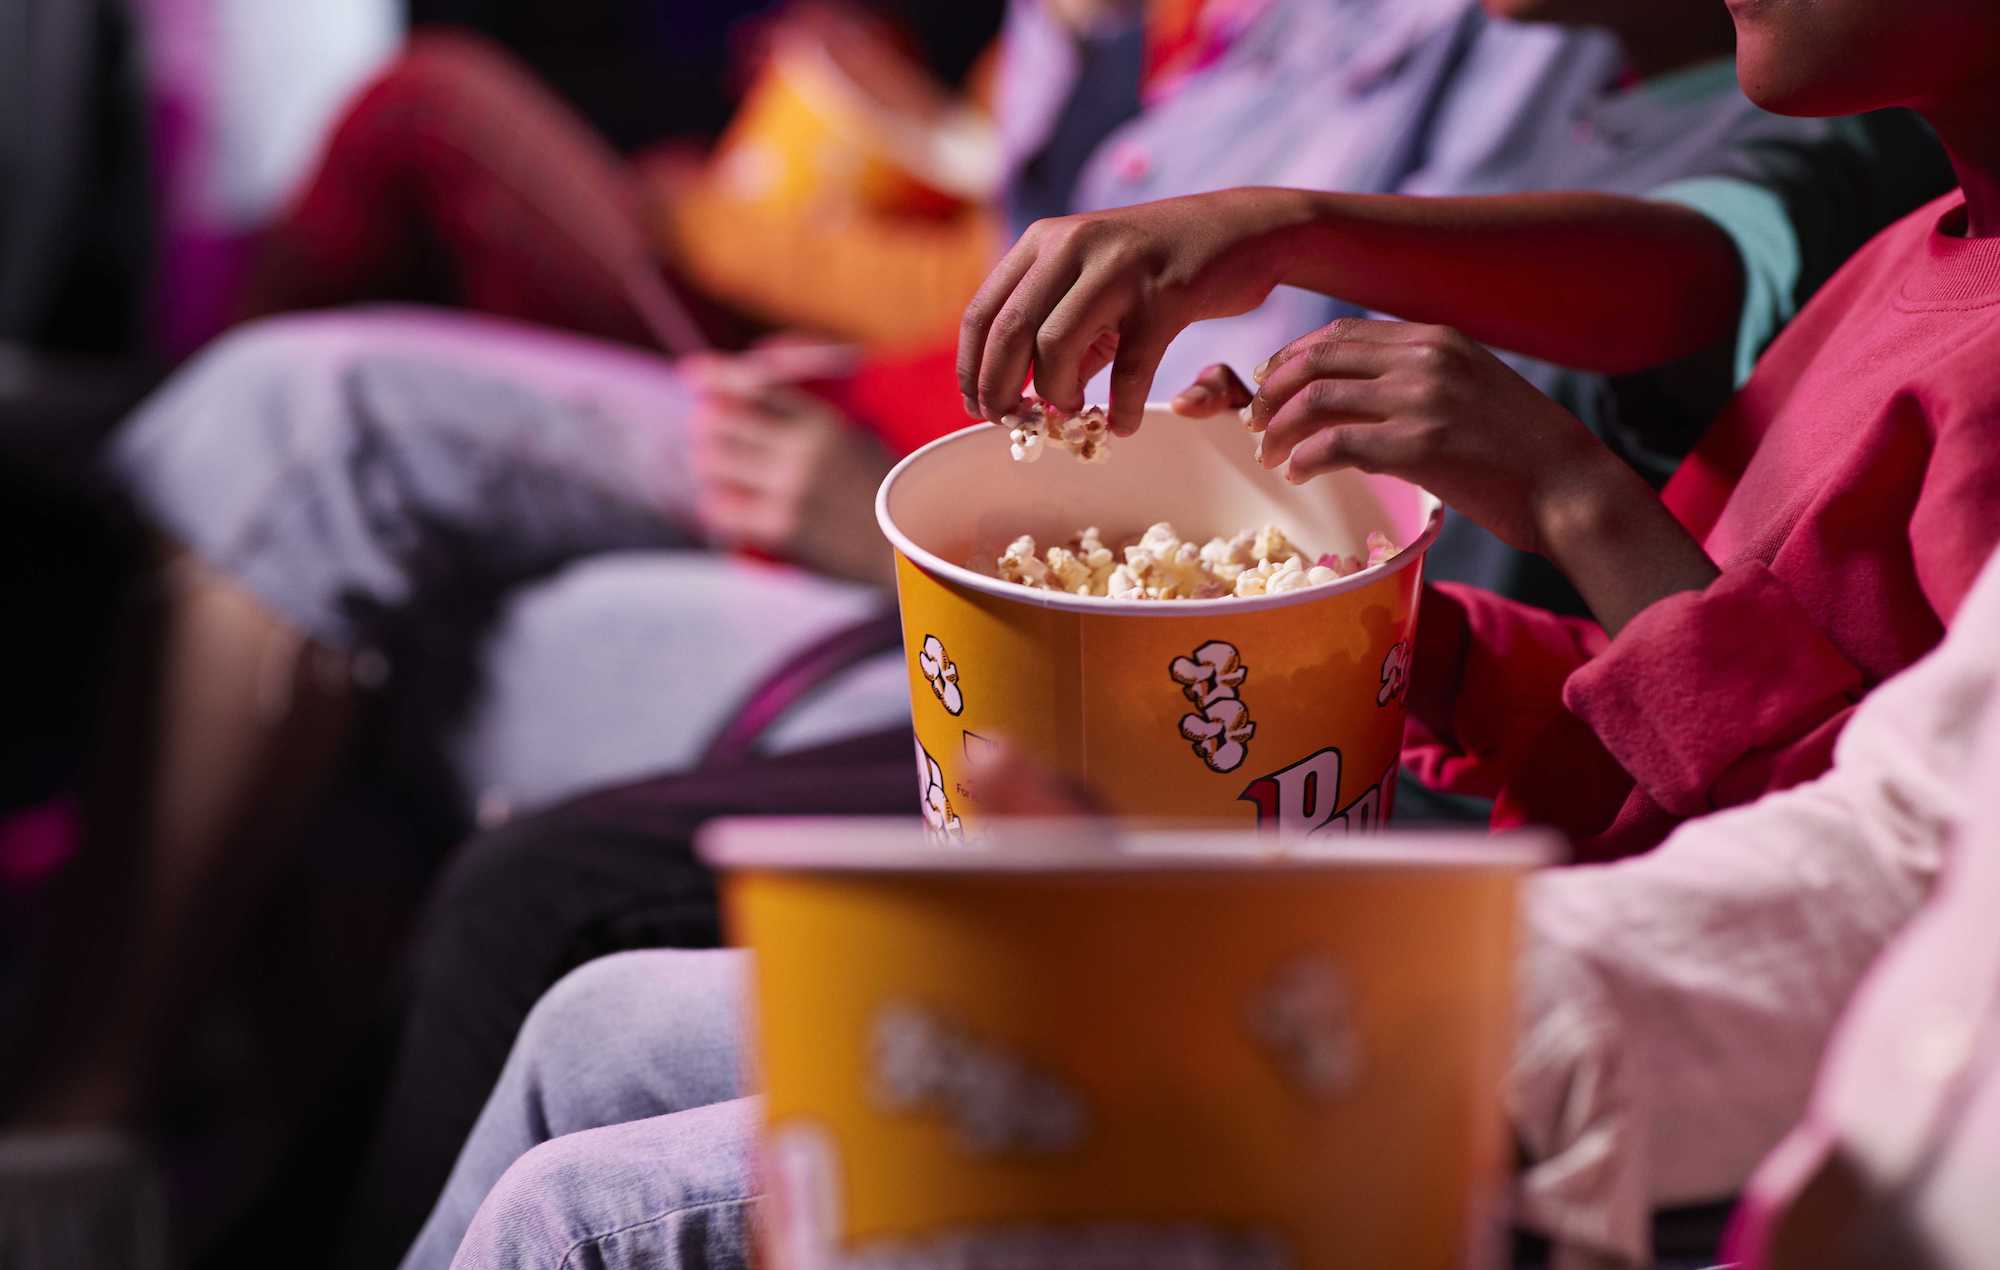 friends sharing popcorn at the movies